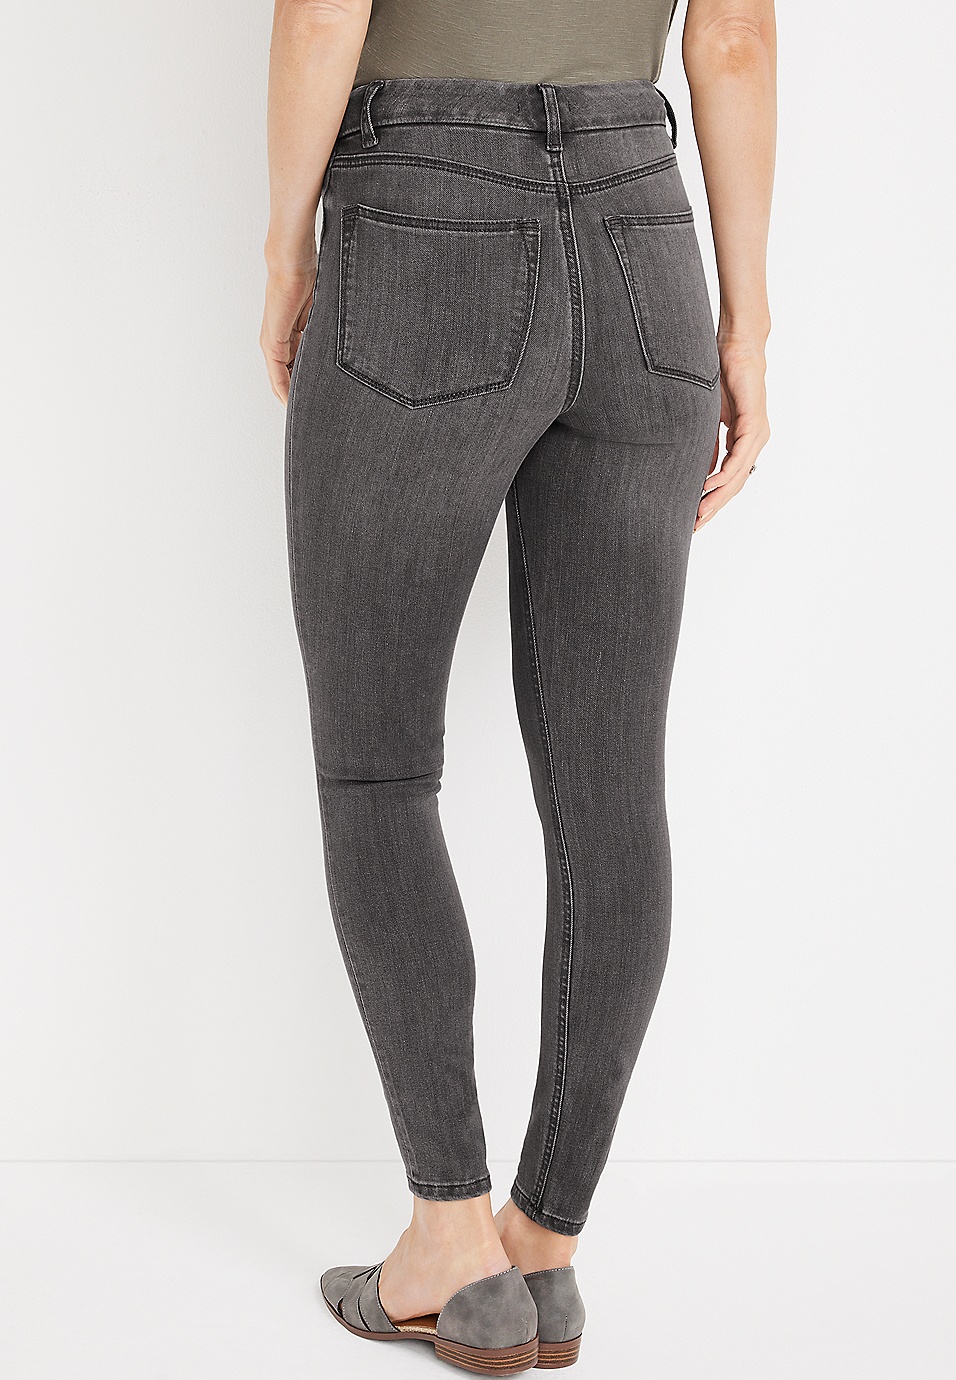 m jeans by maurices™ High Rise Heather Jegging | maurices